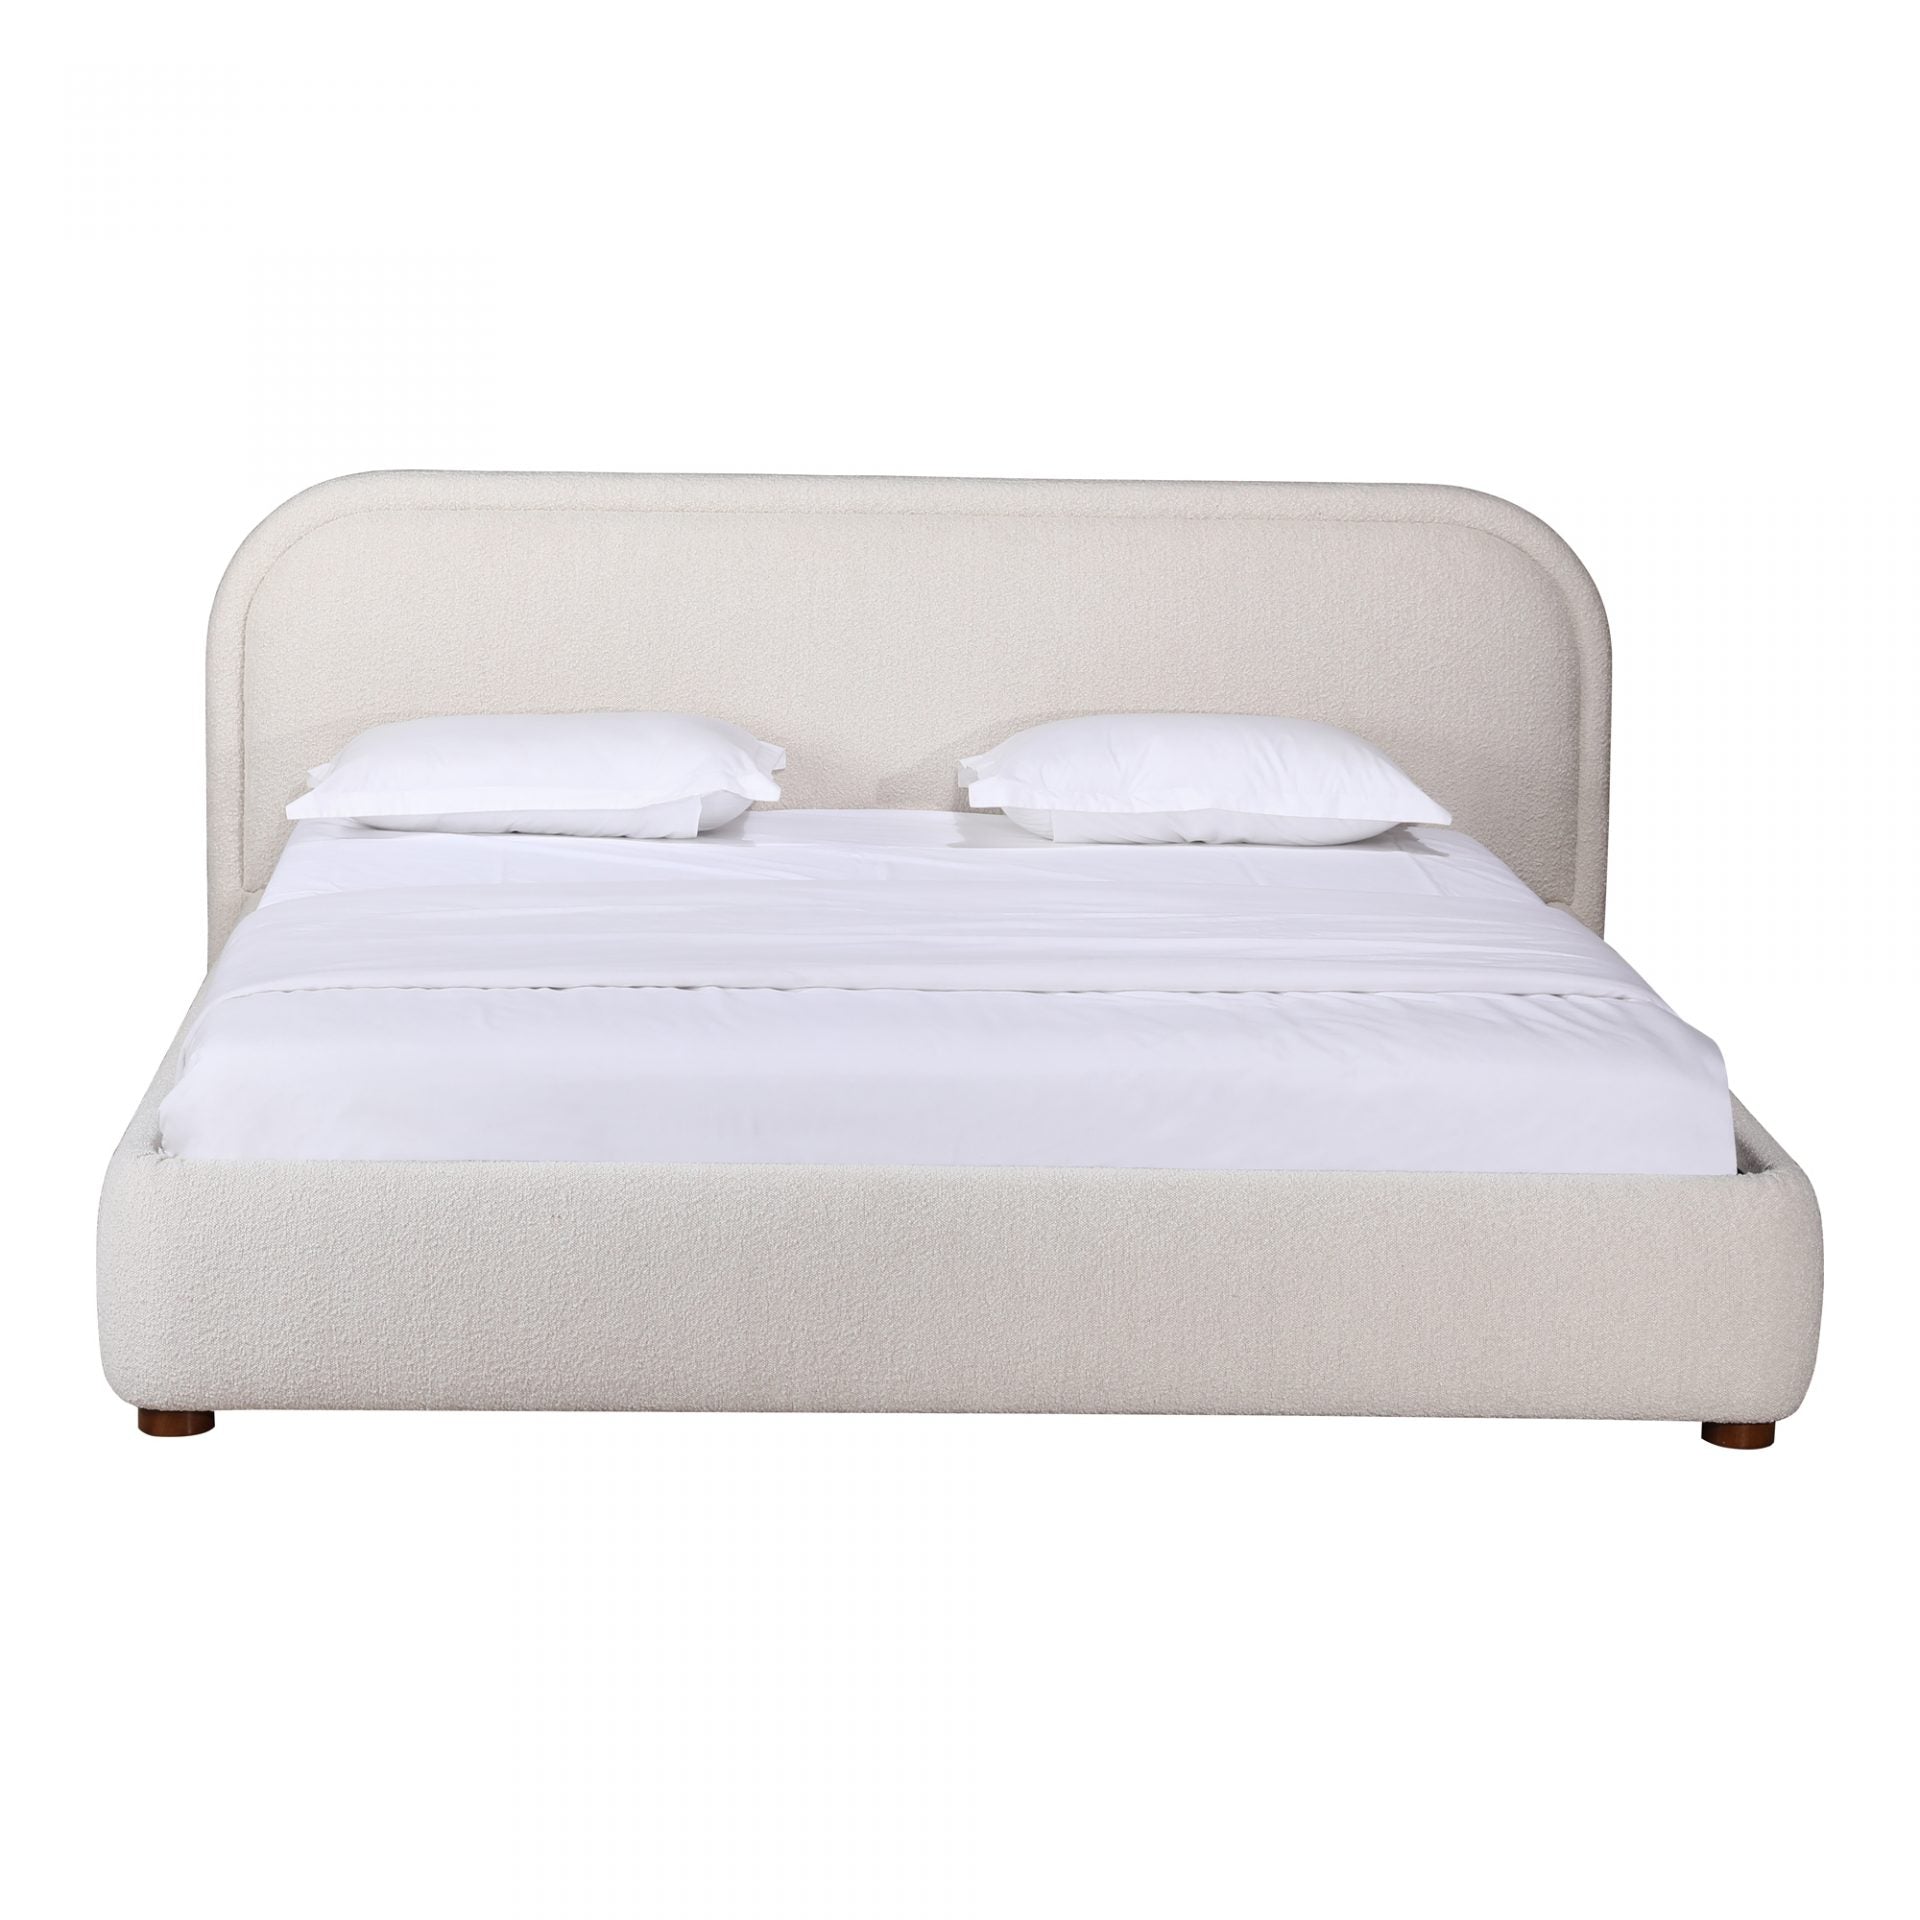 Conal Oatmeal Bed